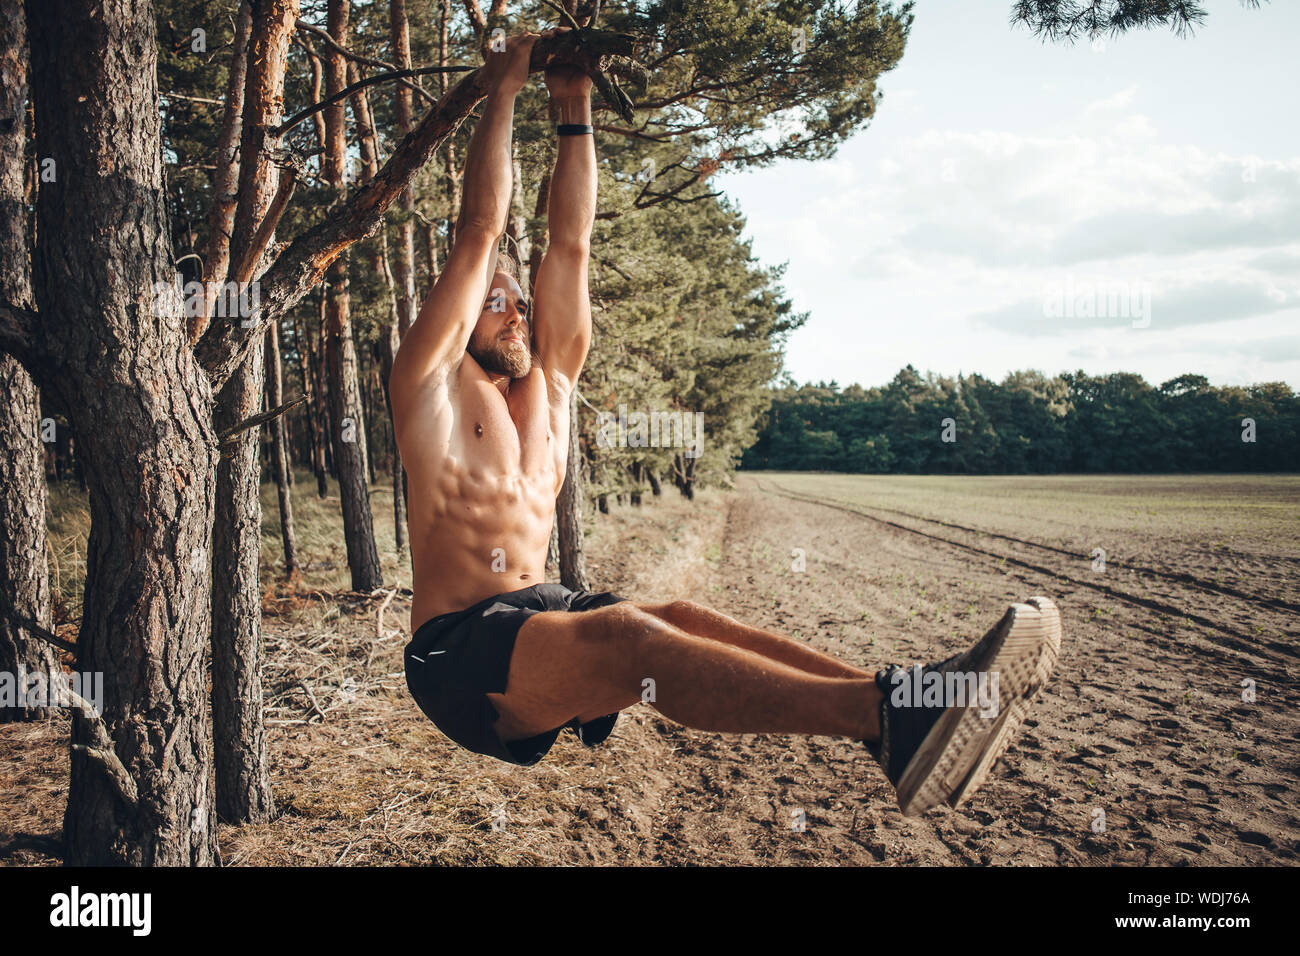 Man is training his abdominal muscles outdoors Stock Photo